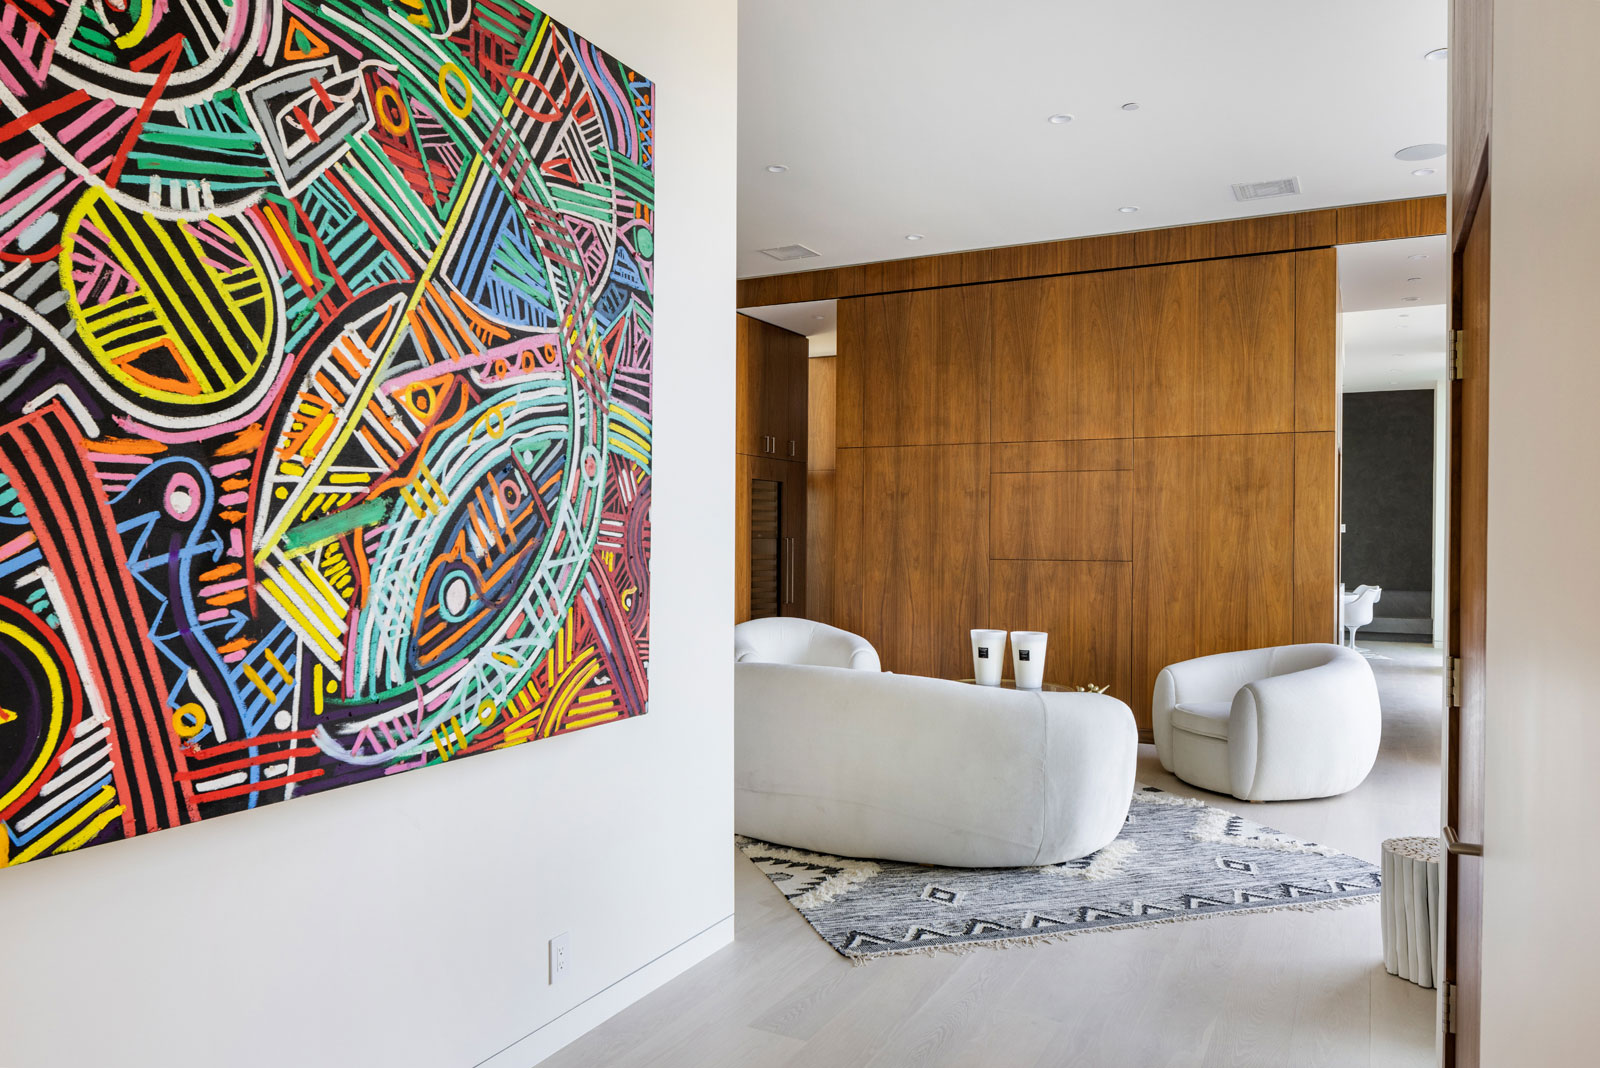 The view into the living room from the entry. The center walnut panel can be remove so a television can be mounted. Photo: © Anthony Barcelo, Barcelo Photography